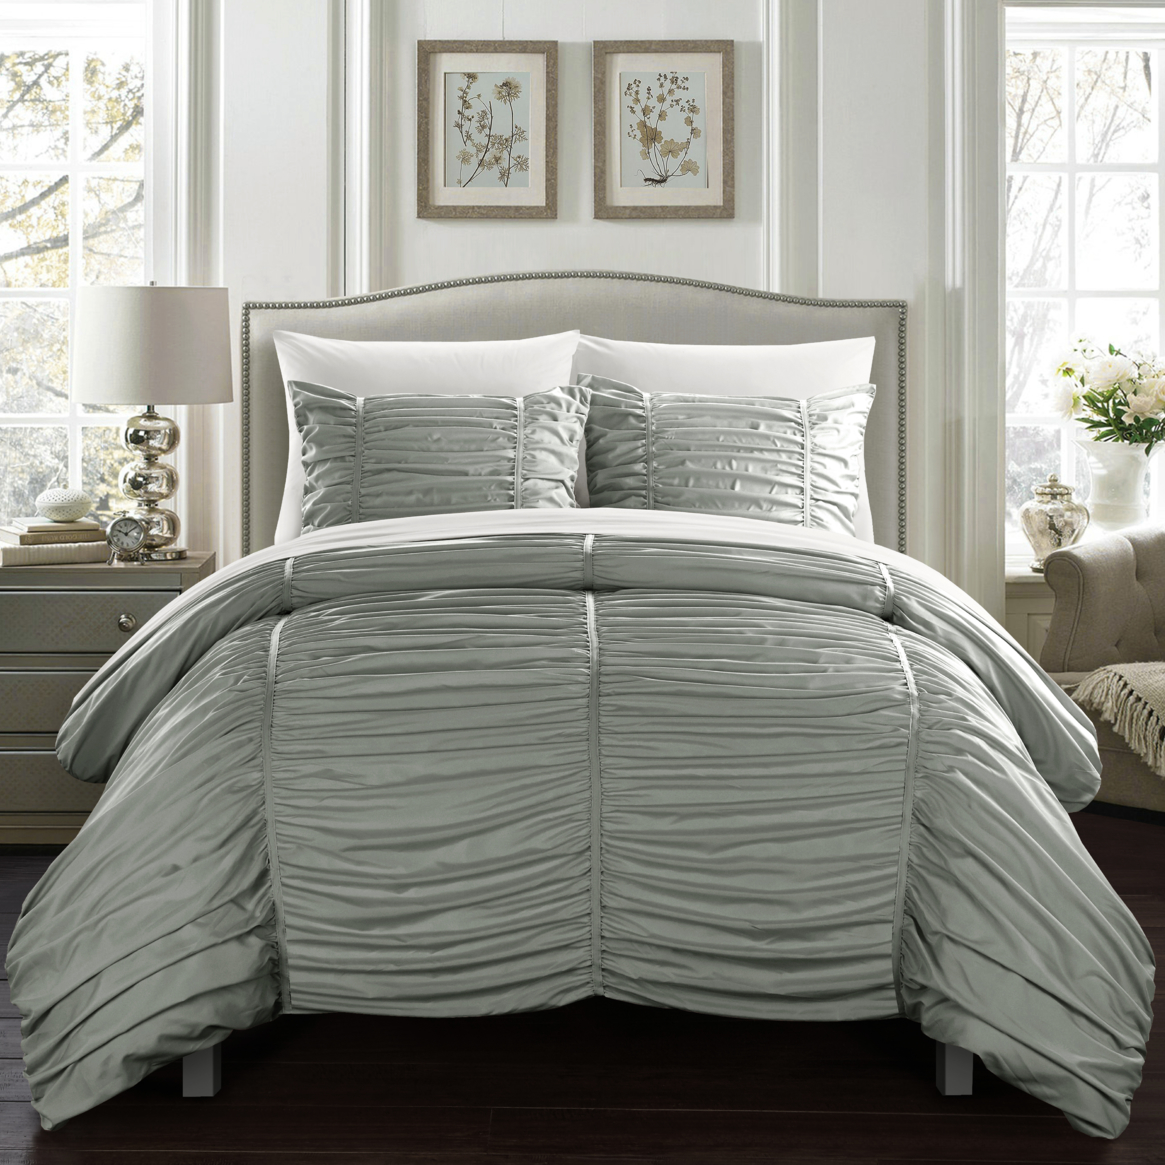 Kleia 7 Or 5 Piece Comforter Set Contemporary Striped Ruched Ruffled Design Bed In A Bag - Grey, Queen